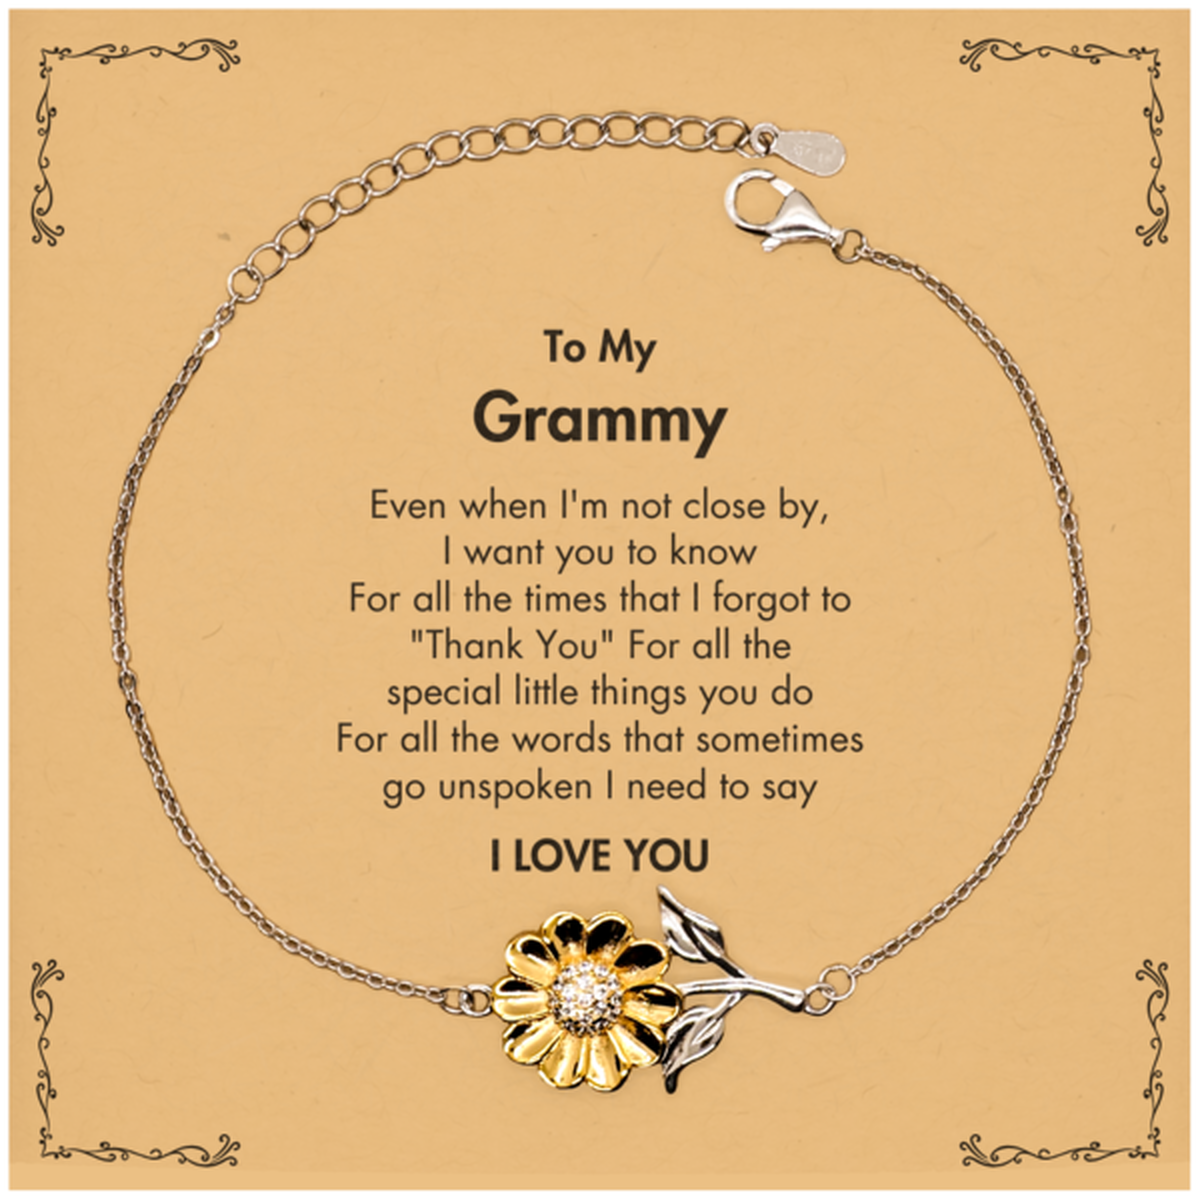 Thank You Gifts for Grammy, Keepsake Sunflower Bracelet Gifts for Grammy Birthday Mother's day Father's Day Grammy For all the words That sometimes go unspoken I need to say I LOVE YOU